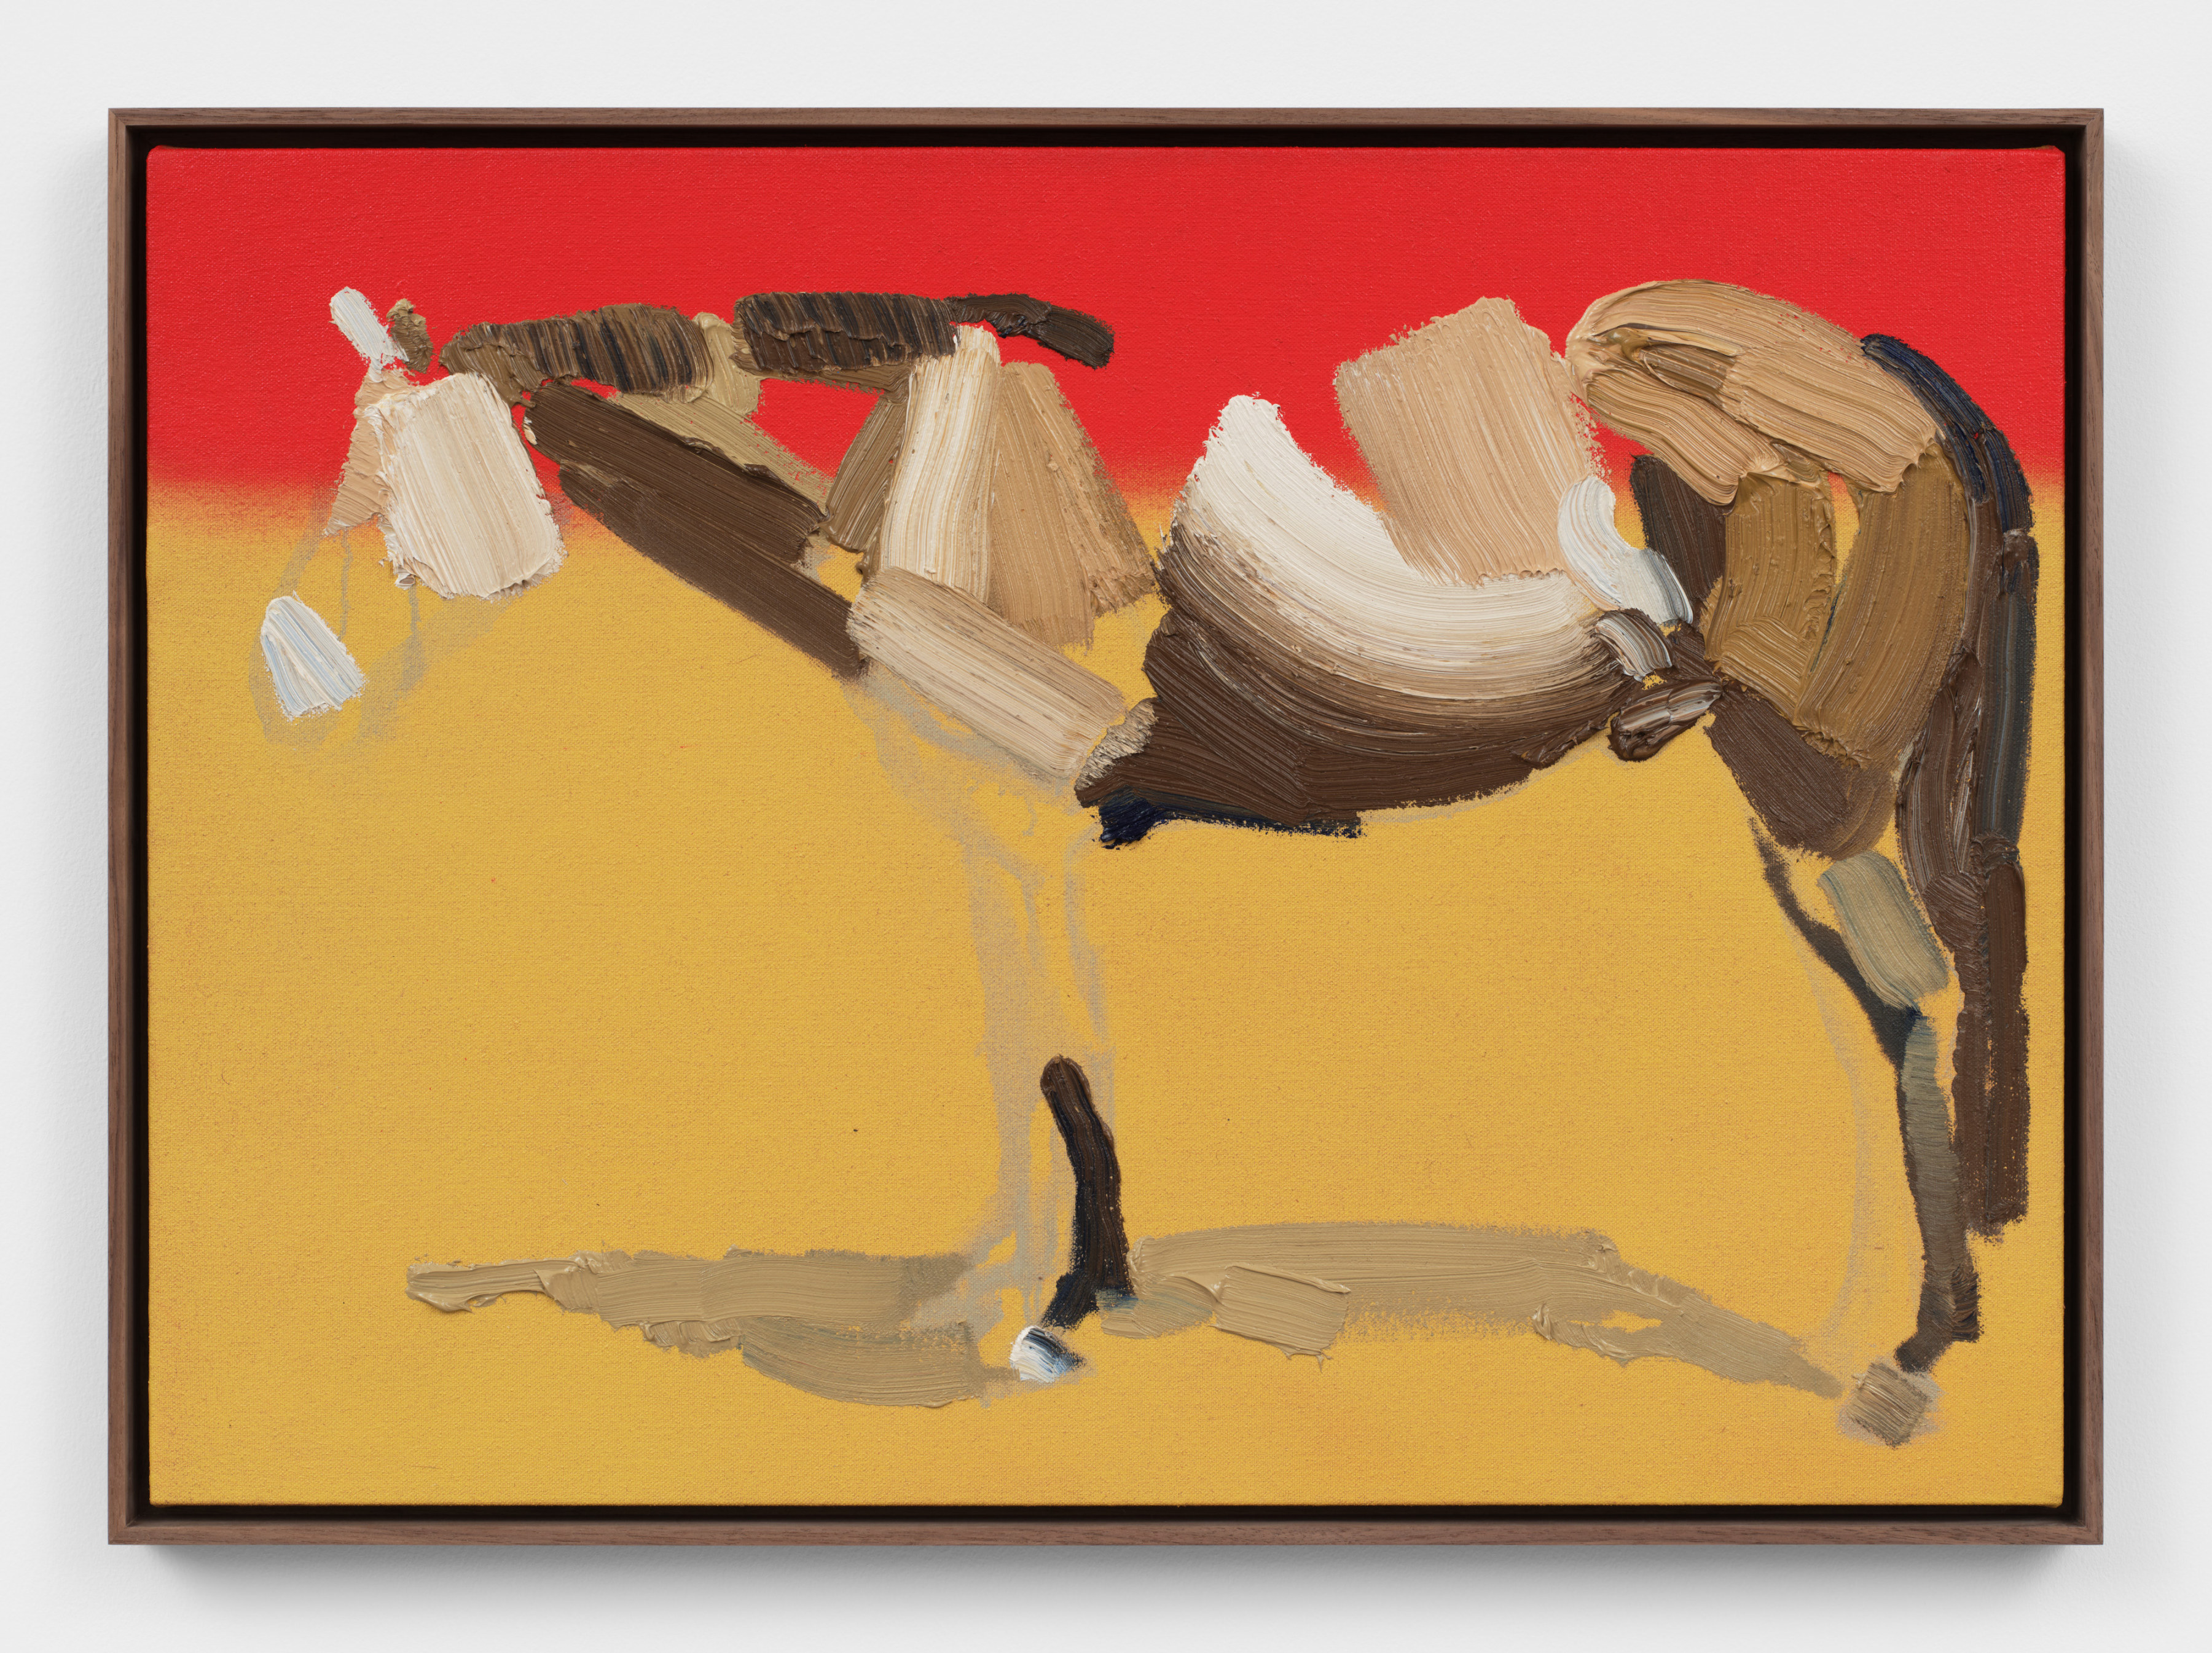 A painting with thick brushstrokes depicting the side view of a horse grazing rendered in shades of brown against a red and yellow background.